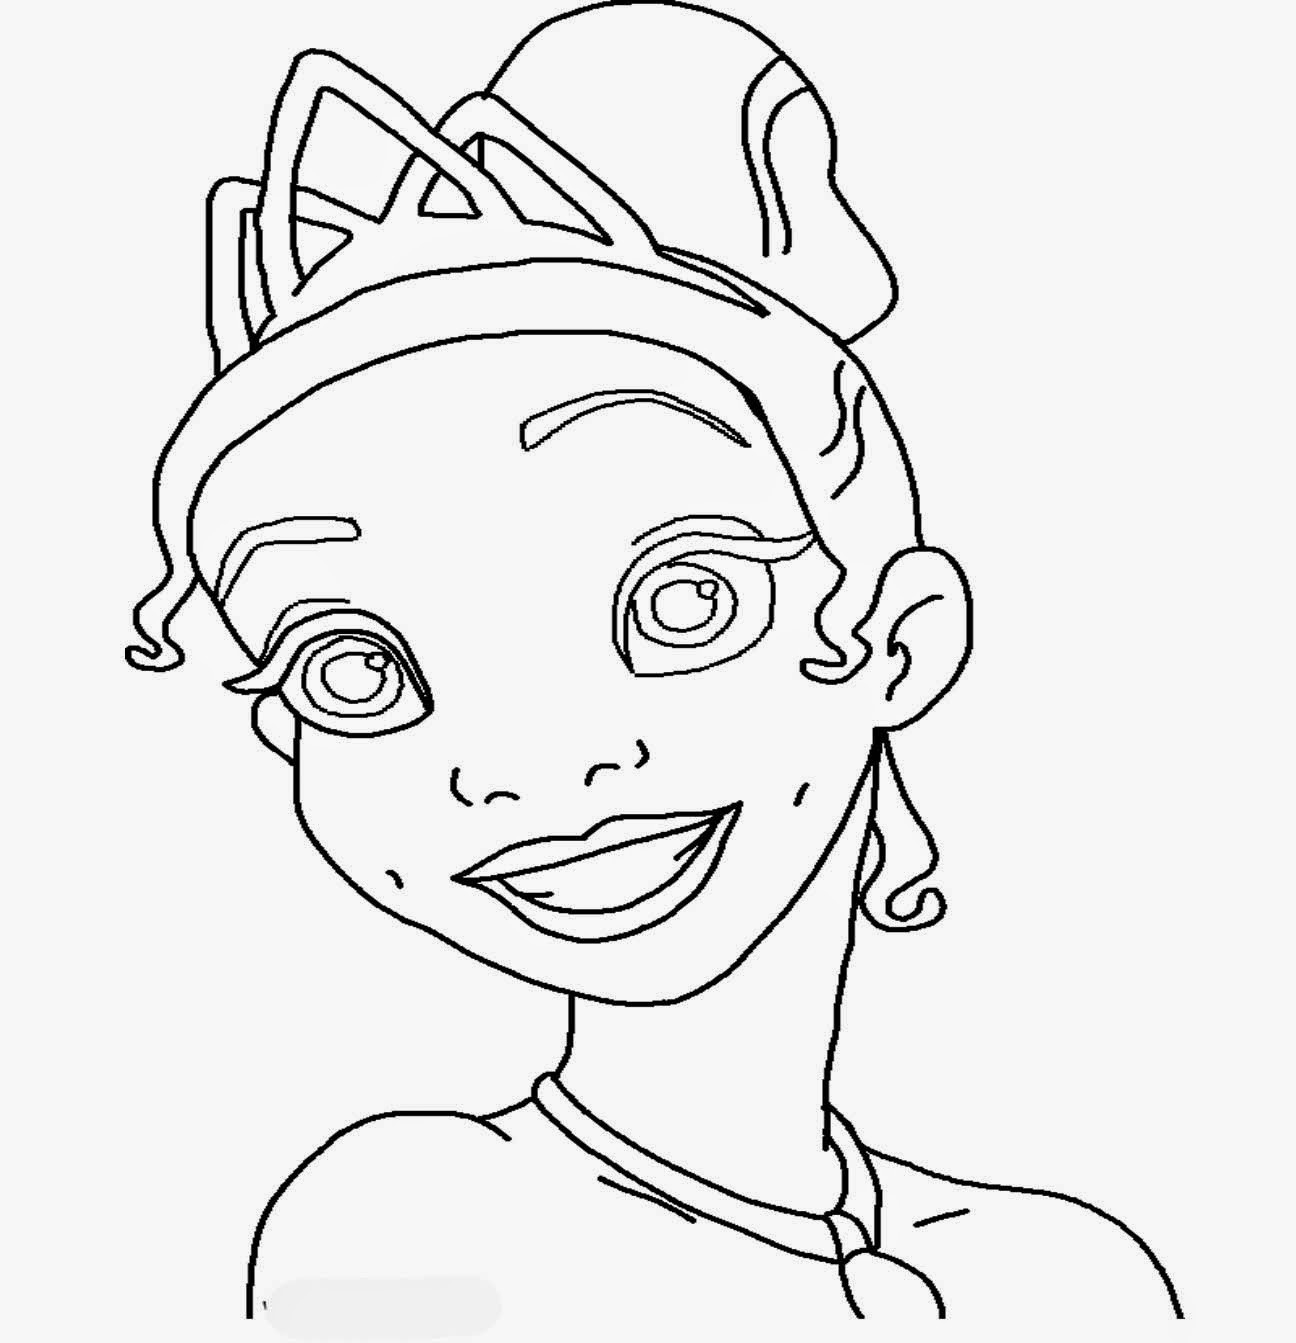 Coloring Pages Disney For Girls
 Disney Coloring Pages for Girls